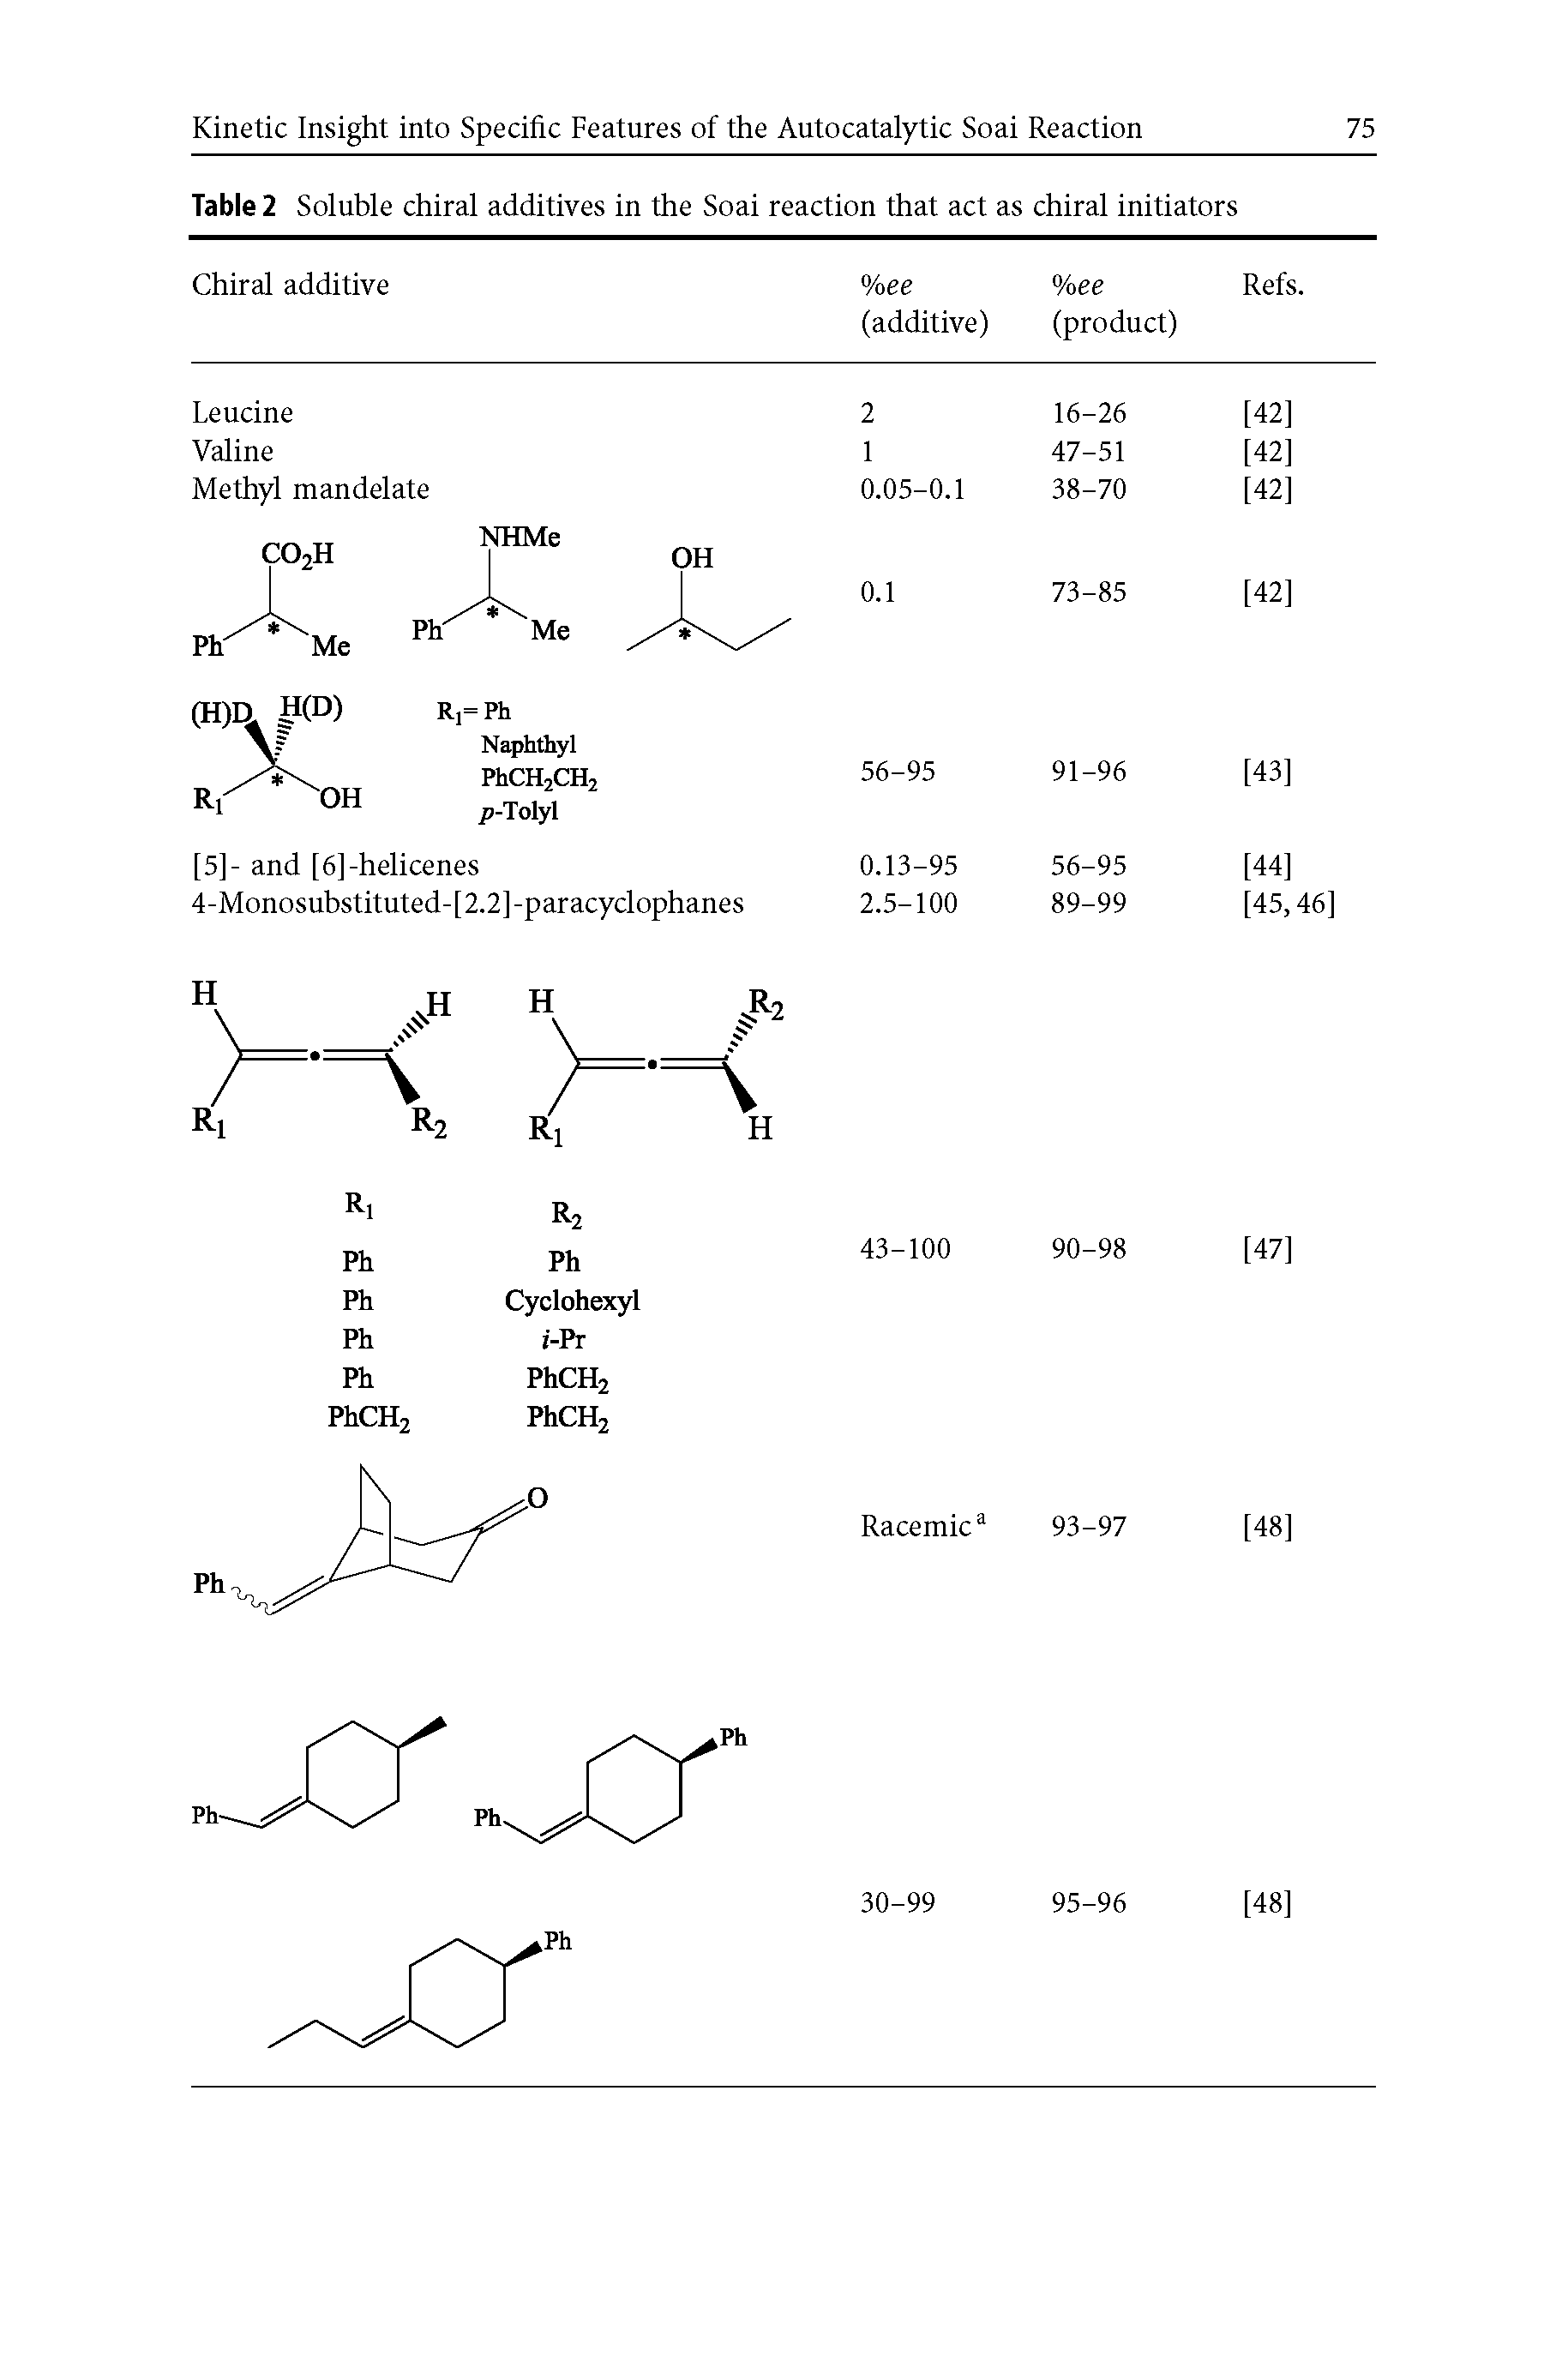 Table 2 Soluble chiral additives in the Soai reaction that act as chiral initiators...